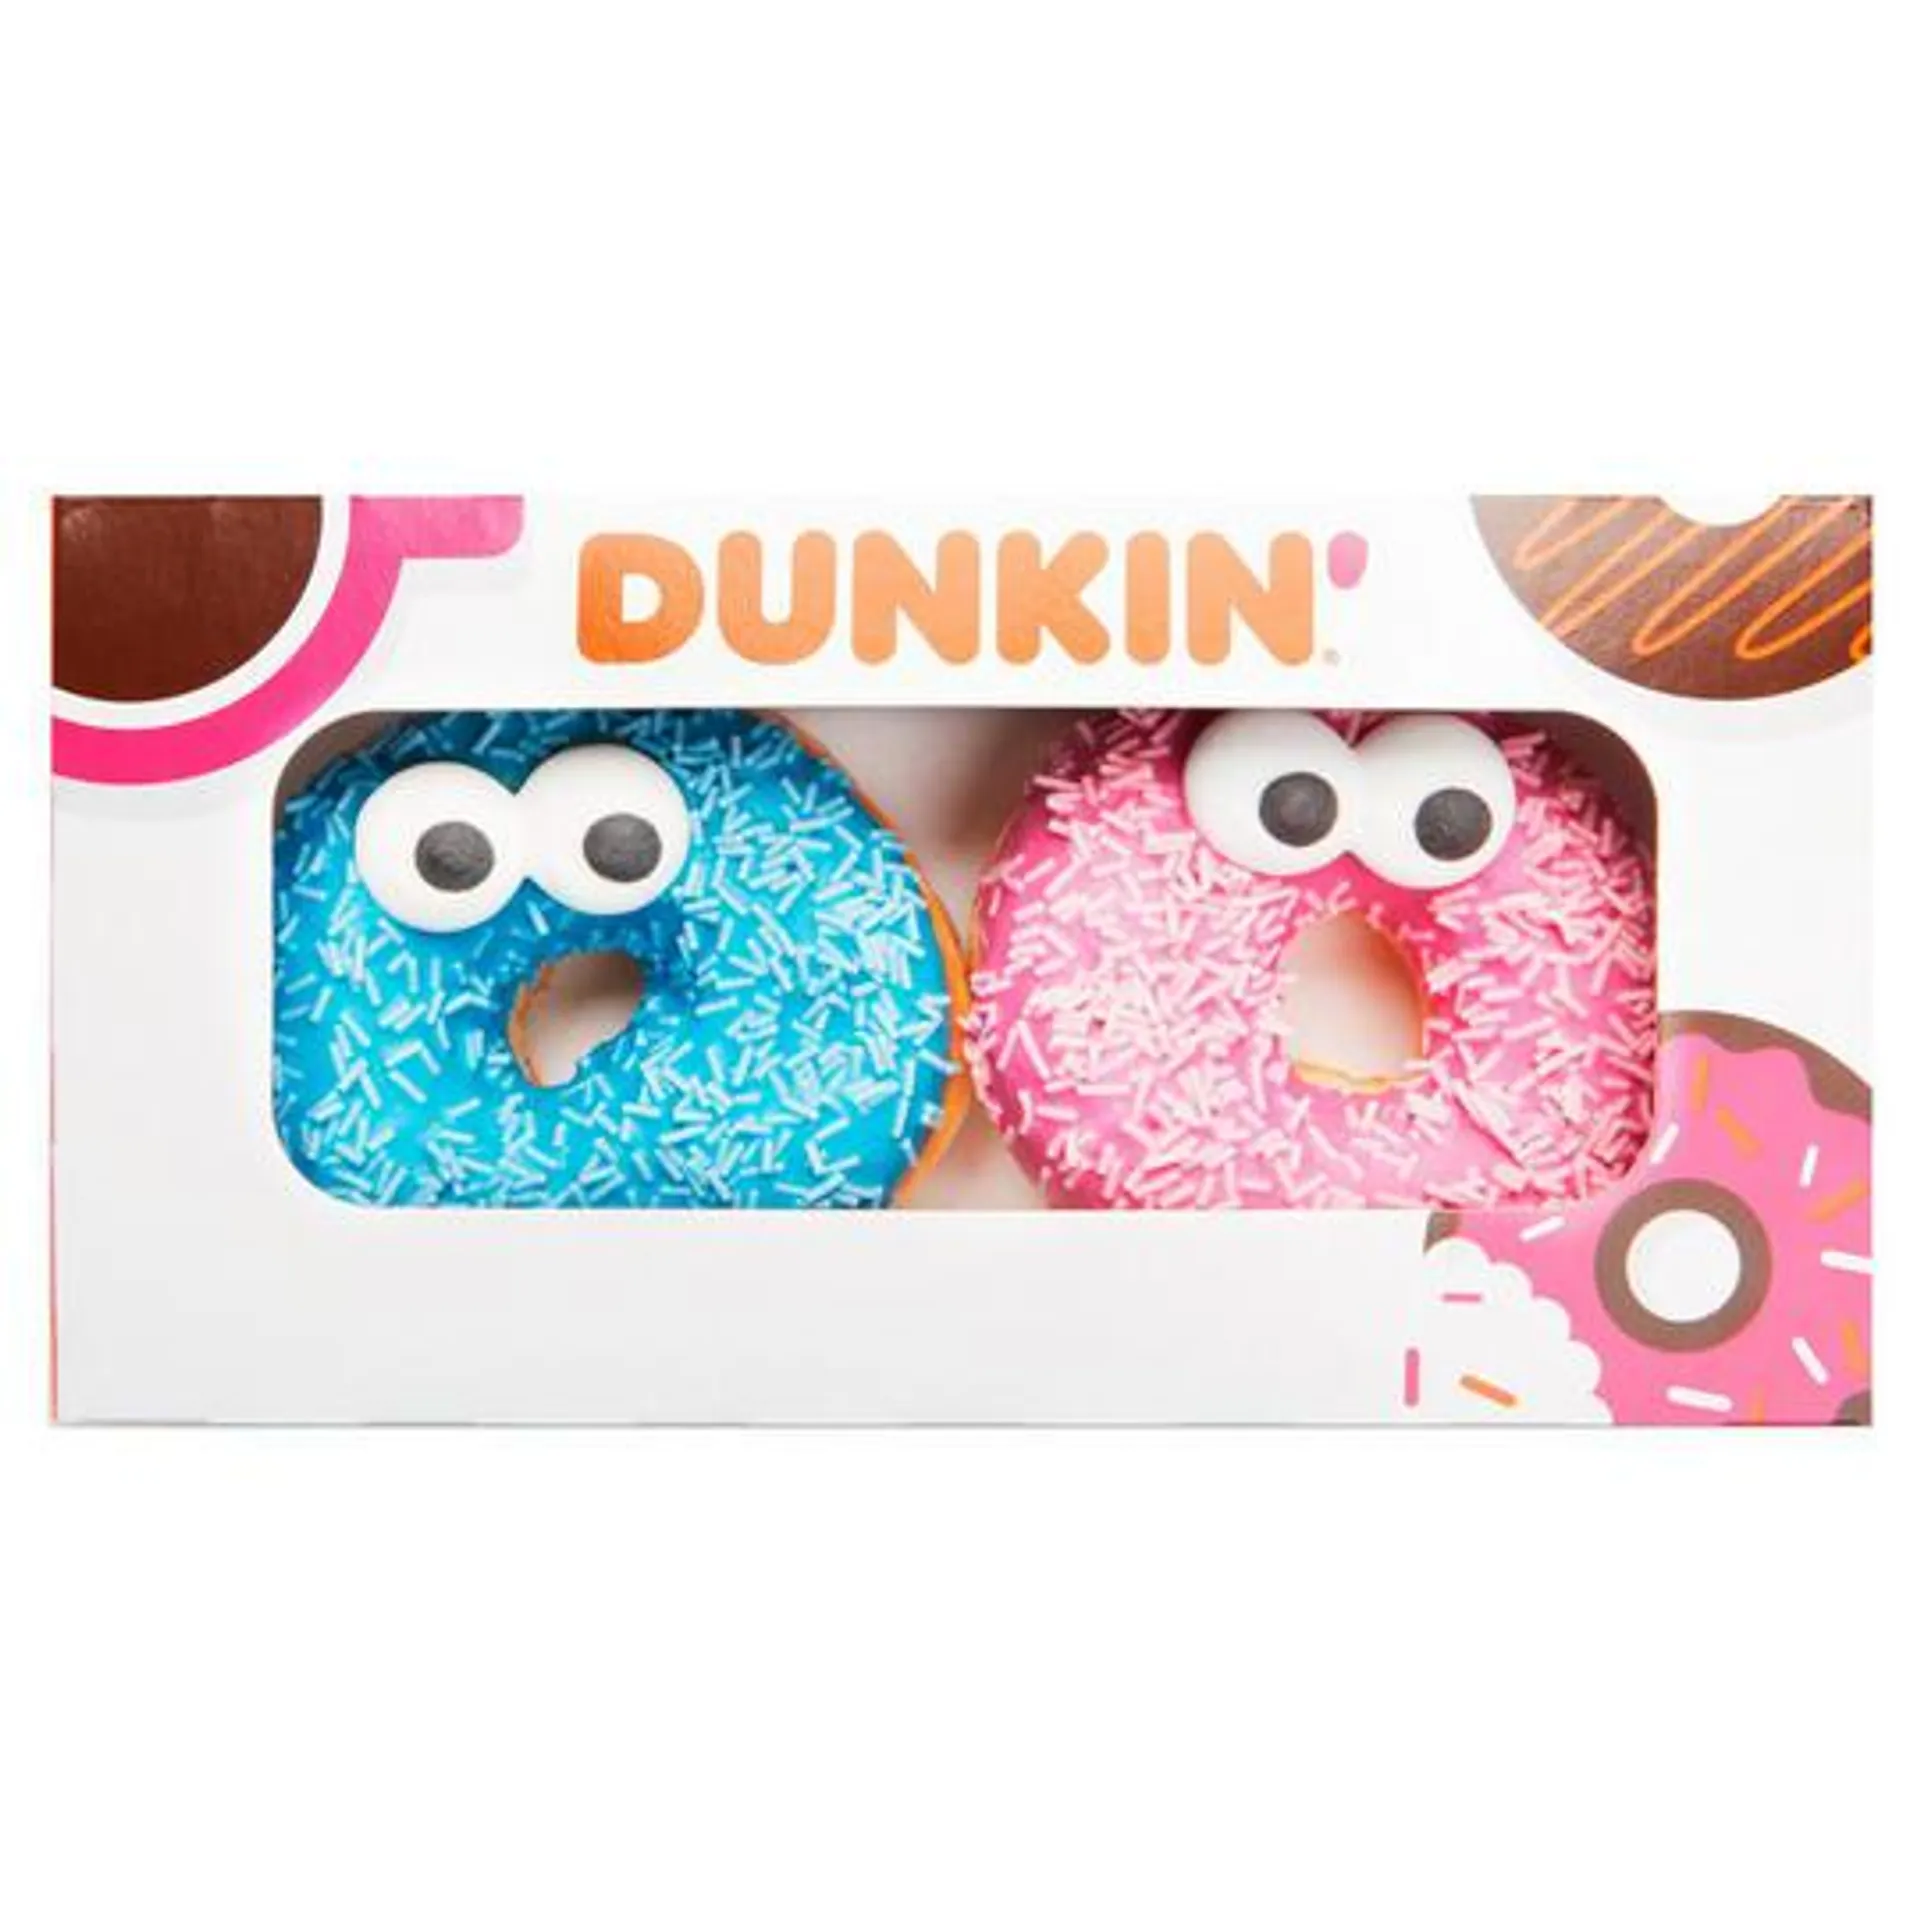 Dunkin' 2 the Monsters 150g